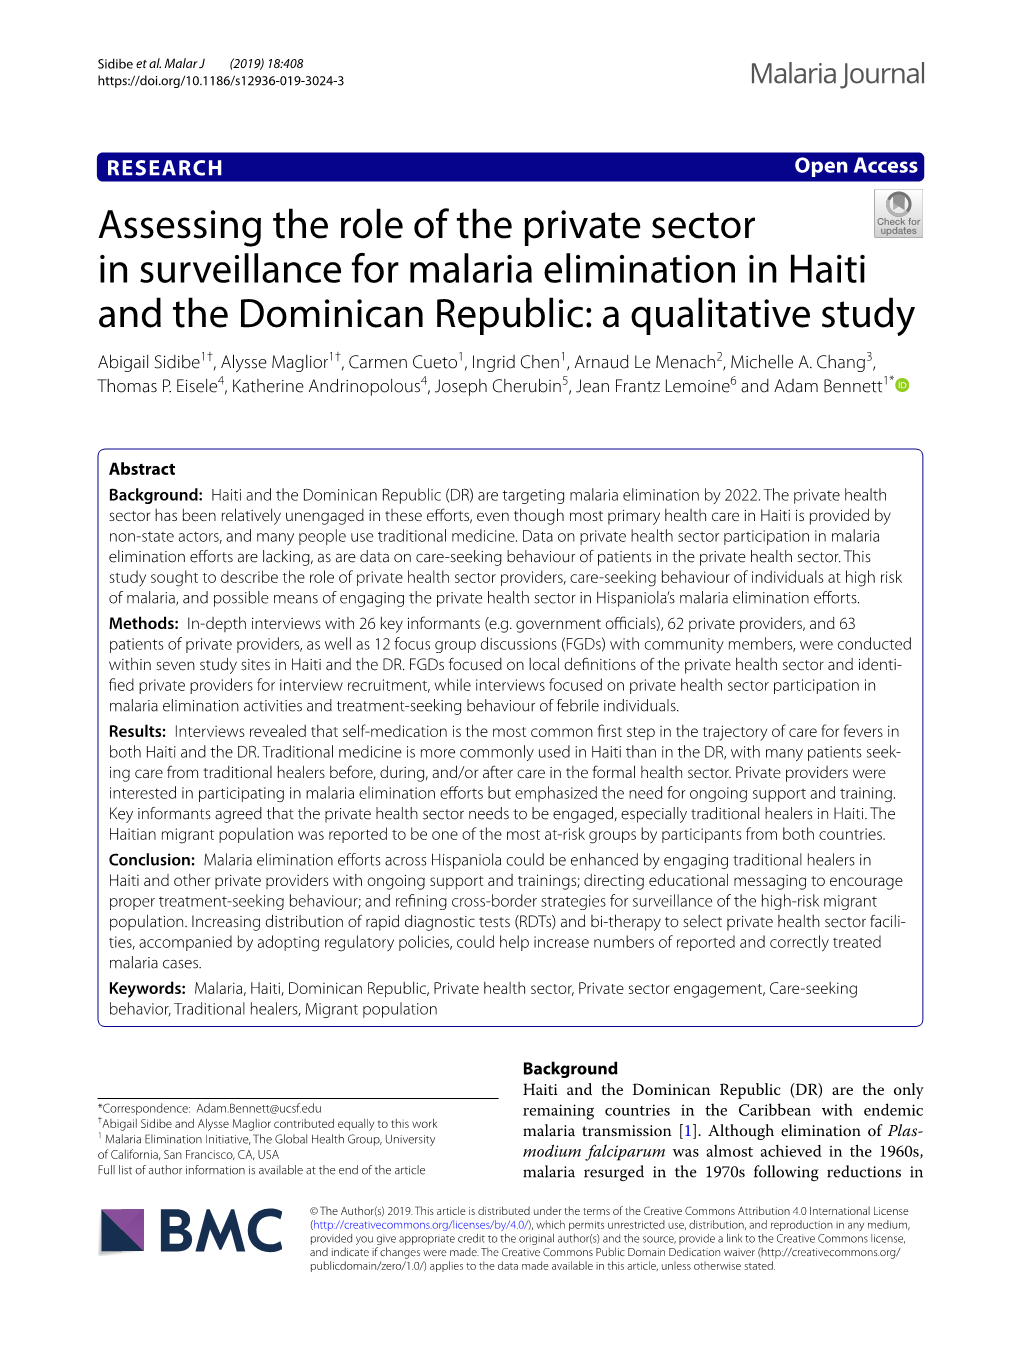 Assessing the Role of the Private Sector in Surveillance For